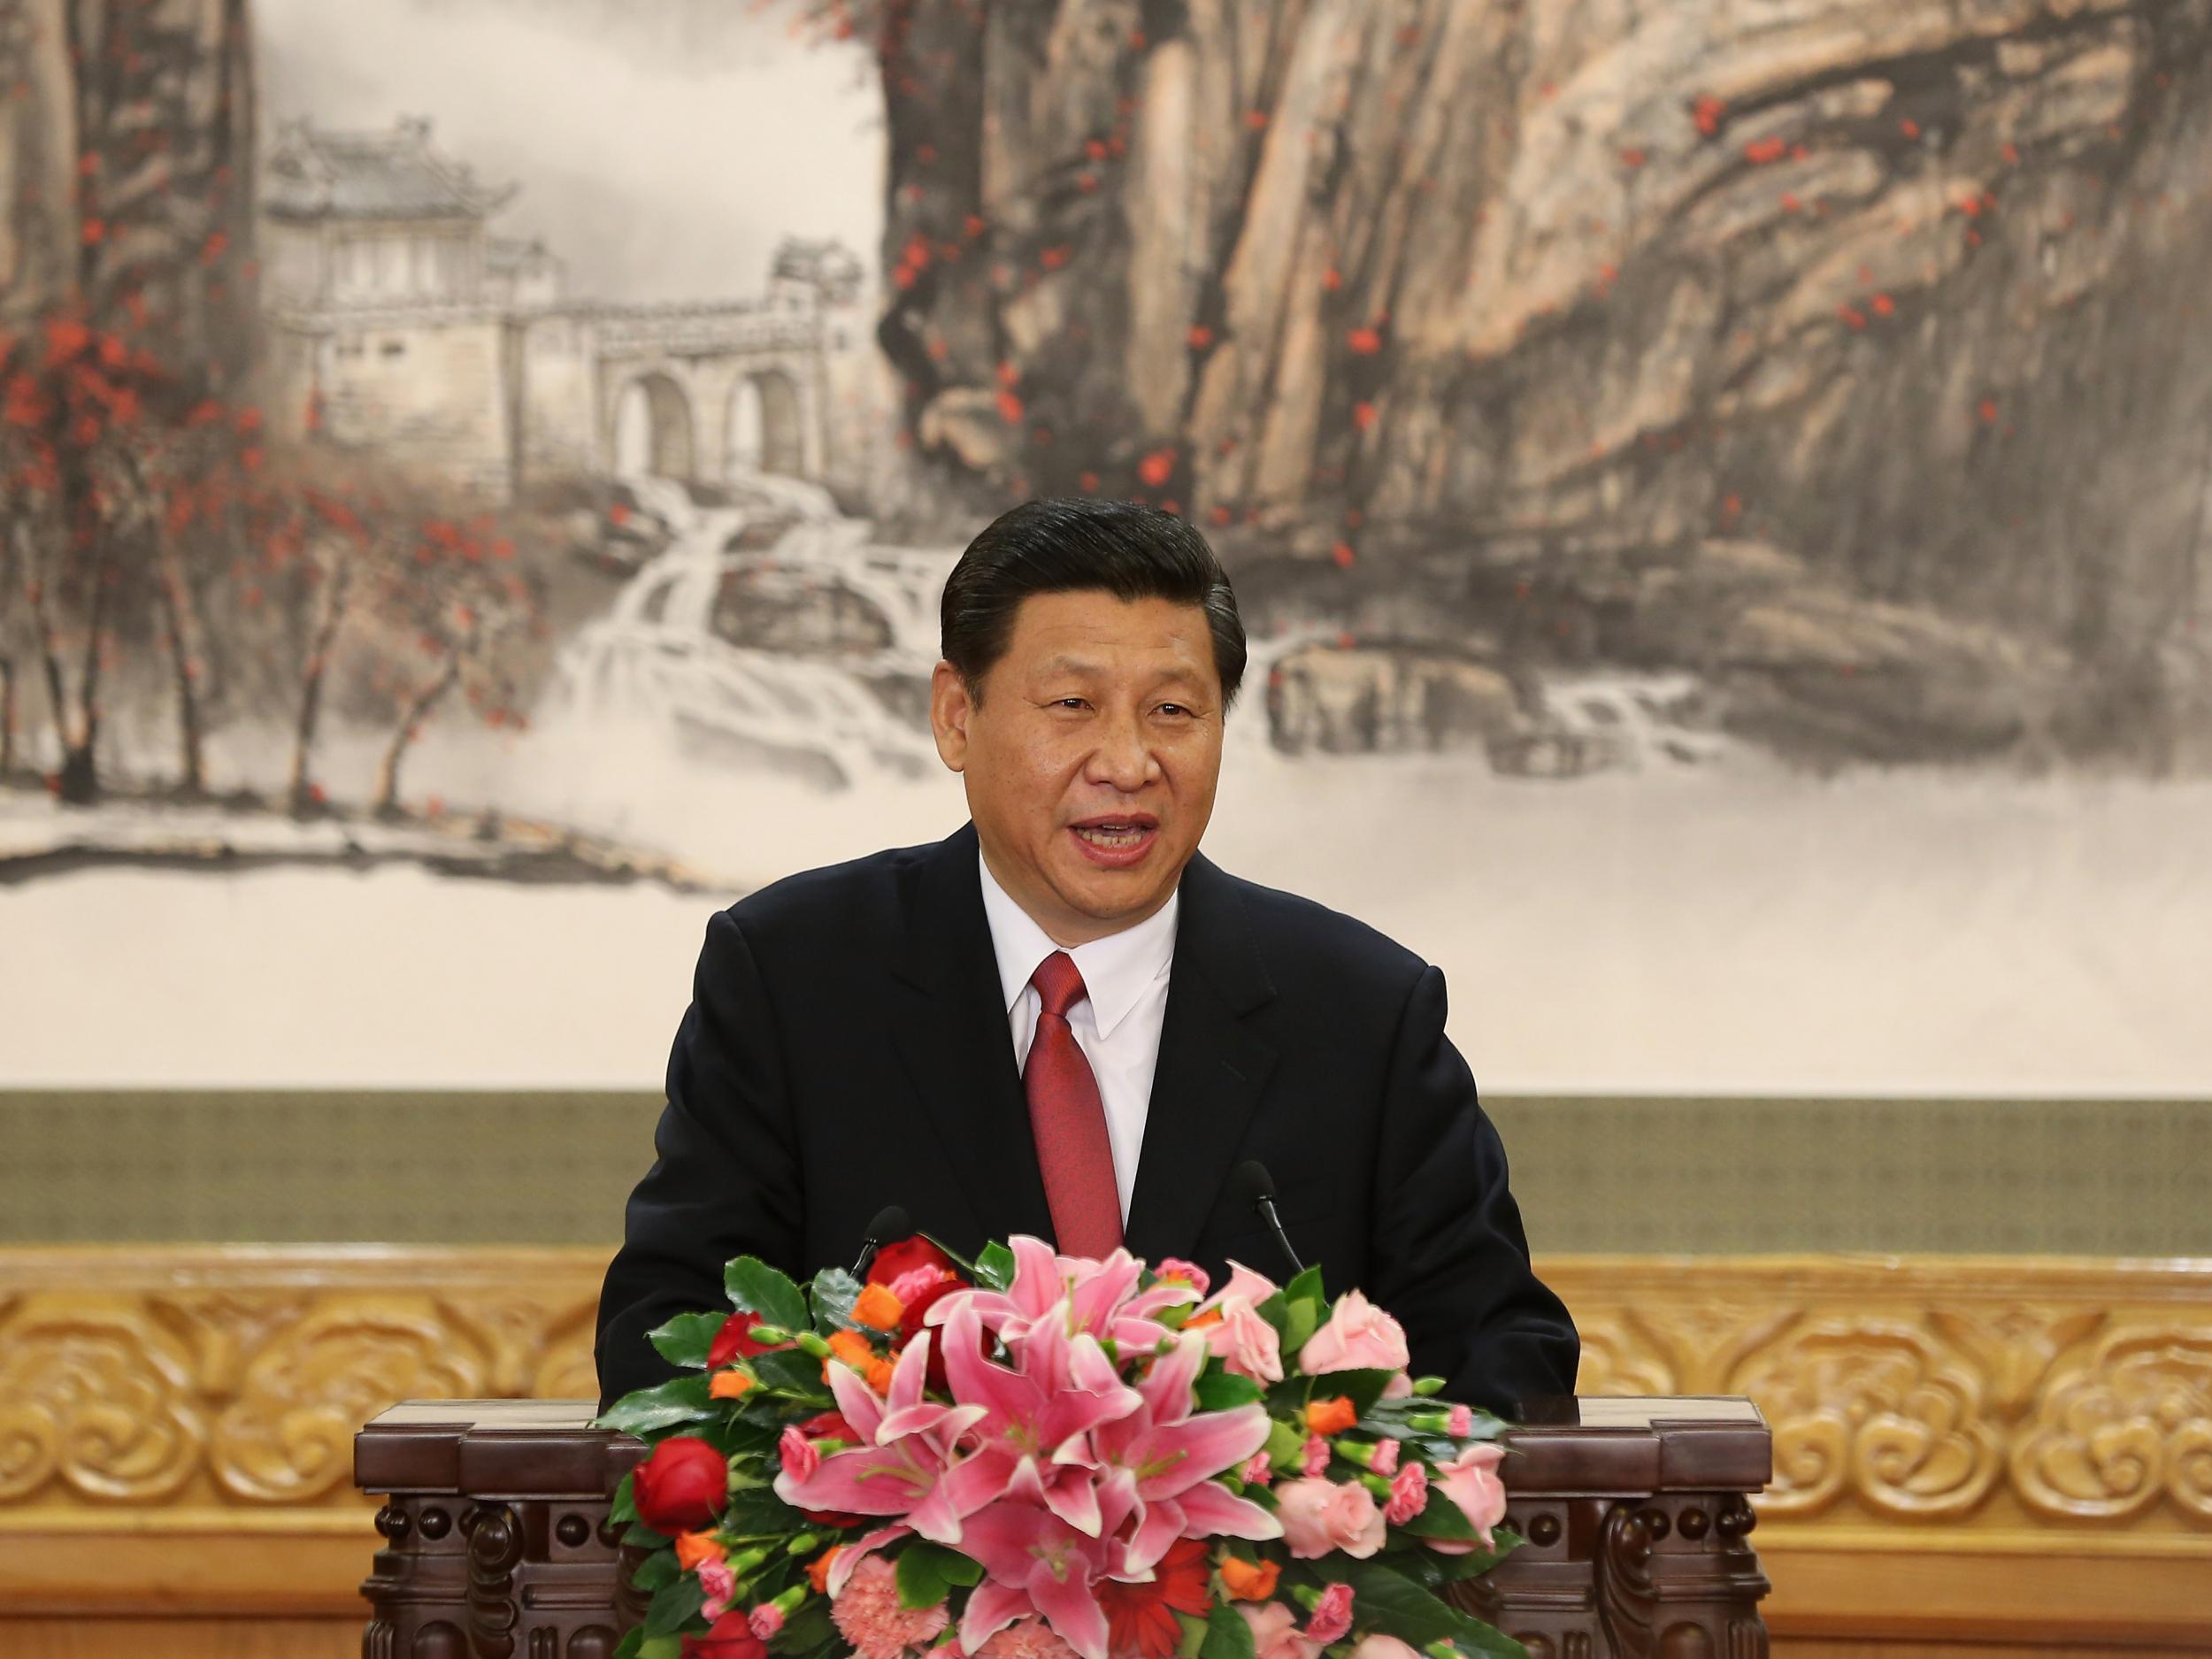 The country's leader, Xi Jinping, has used the bitter standoff to reinforce the Communist Party's message of America being determined to stop their rise